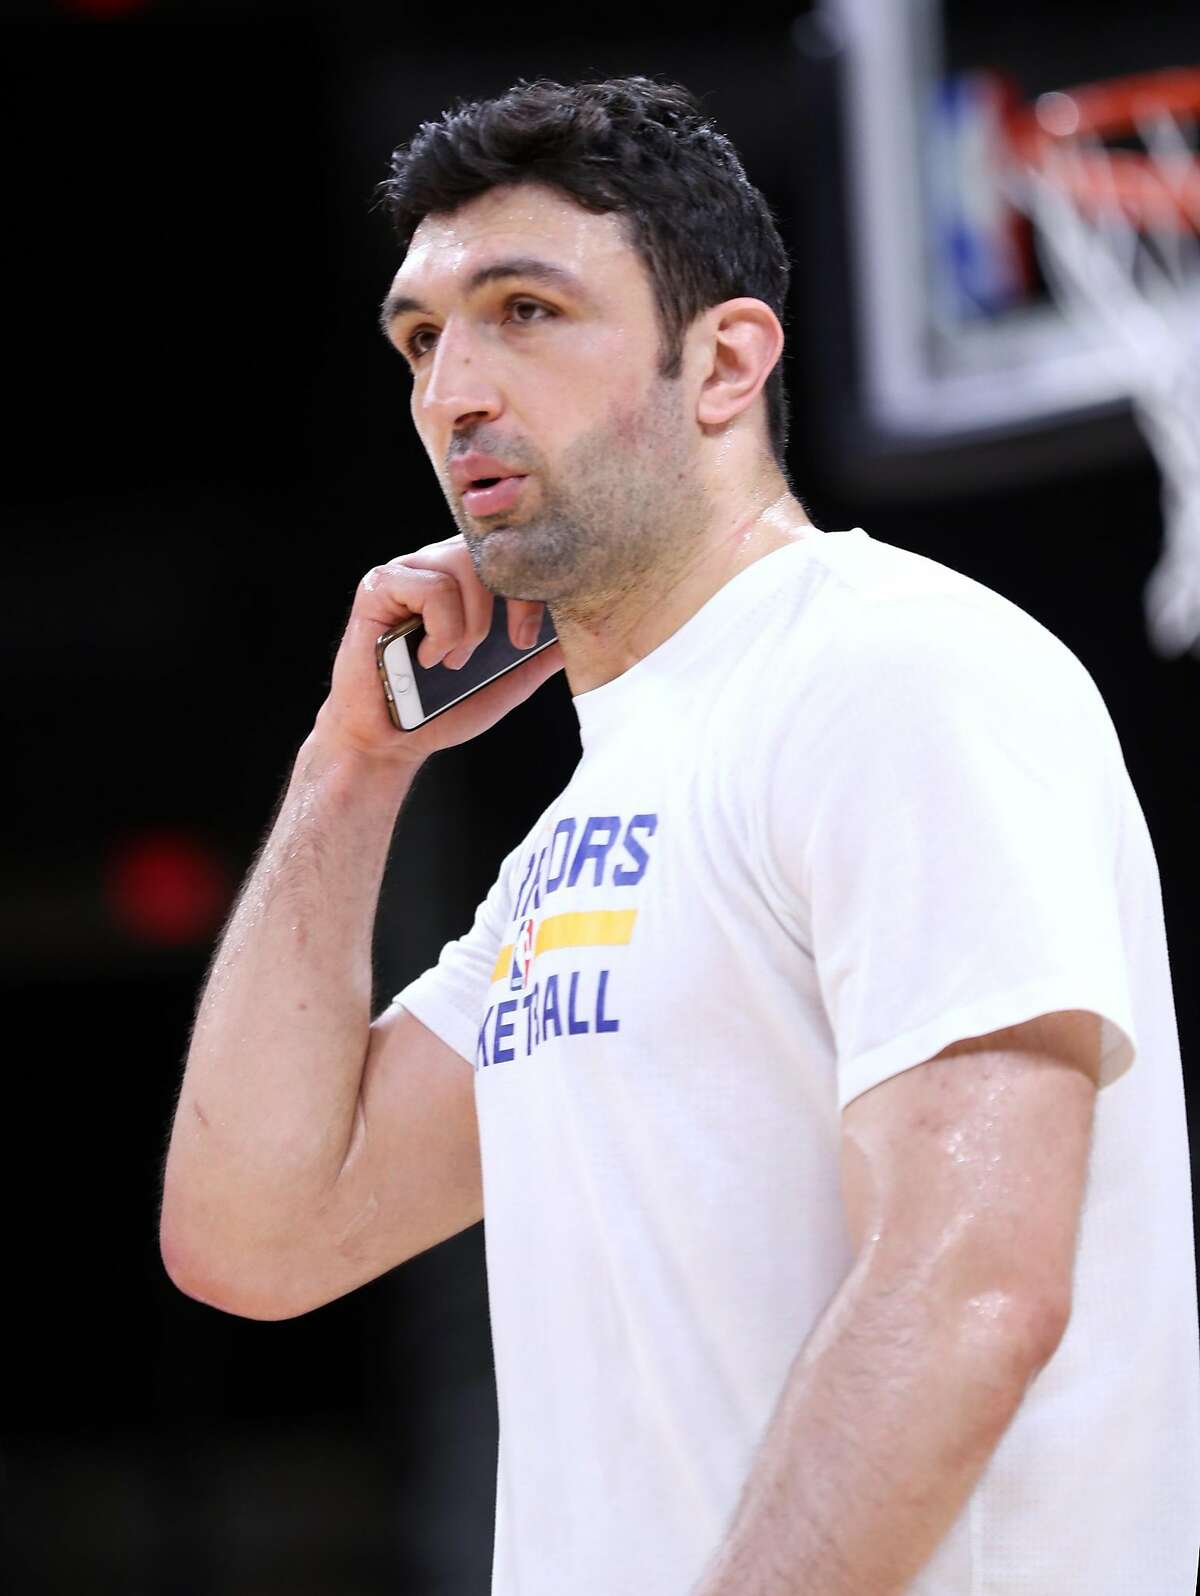 Golden State Warriors' Zaza Pachulia after practice during NBA Western Conference Finals at AT&T Center in San Antonio, Texas, on Sunday, May 21, 2017.